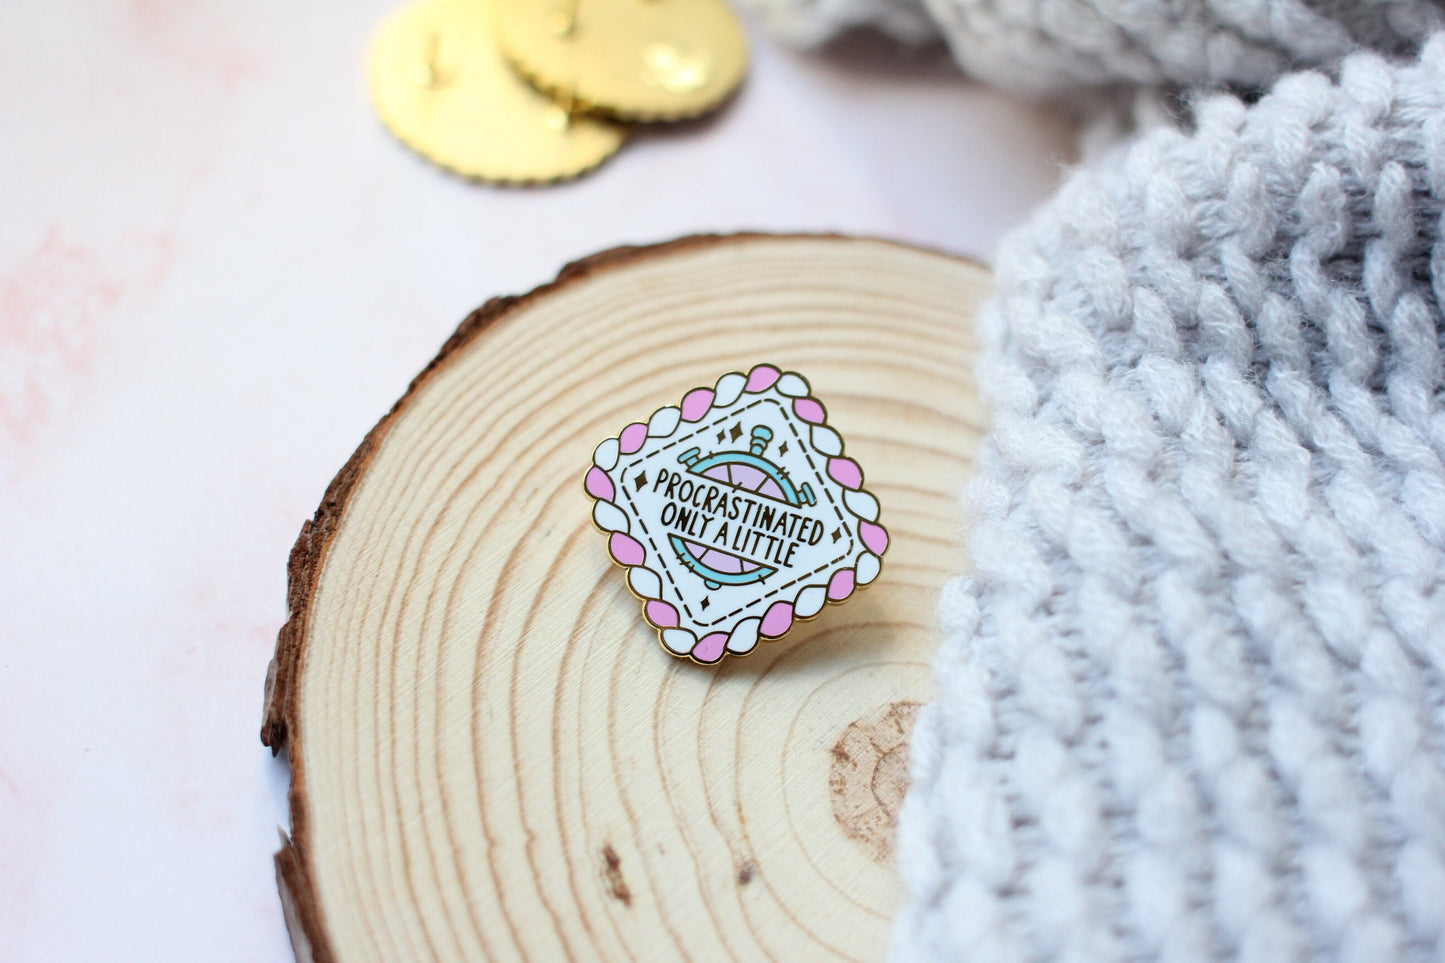 Procrastinated Only A Little | Self Care Badge | Self Love Collectors Hard Enamel Pin Badge | Kawaii Aesthetic Birthday Gift | Christmas Present